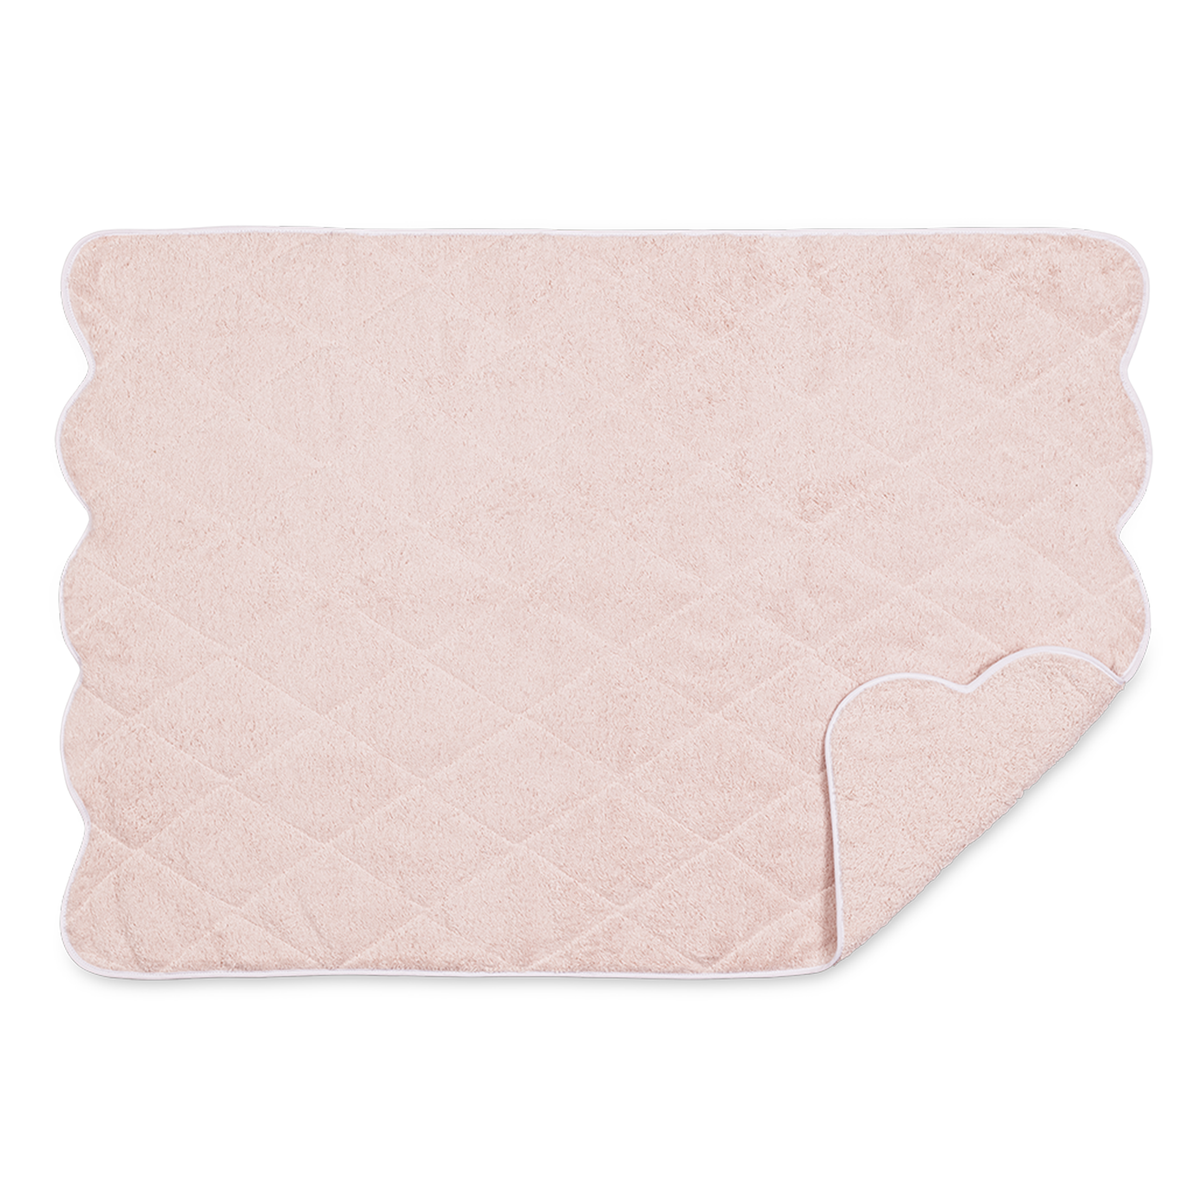 Quilted Tub Mat of Matouk Cairo Scallop in Color Blush/White